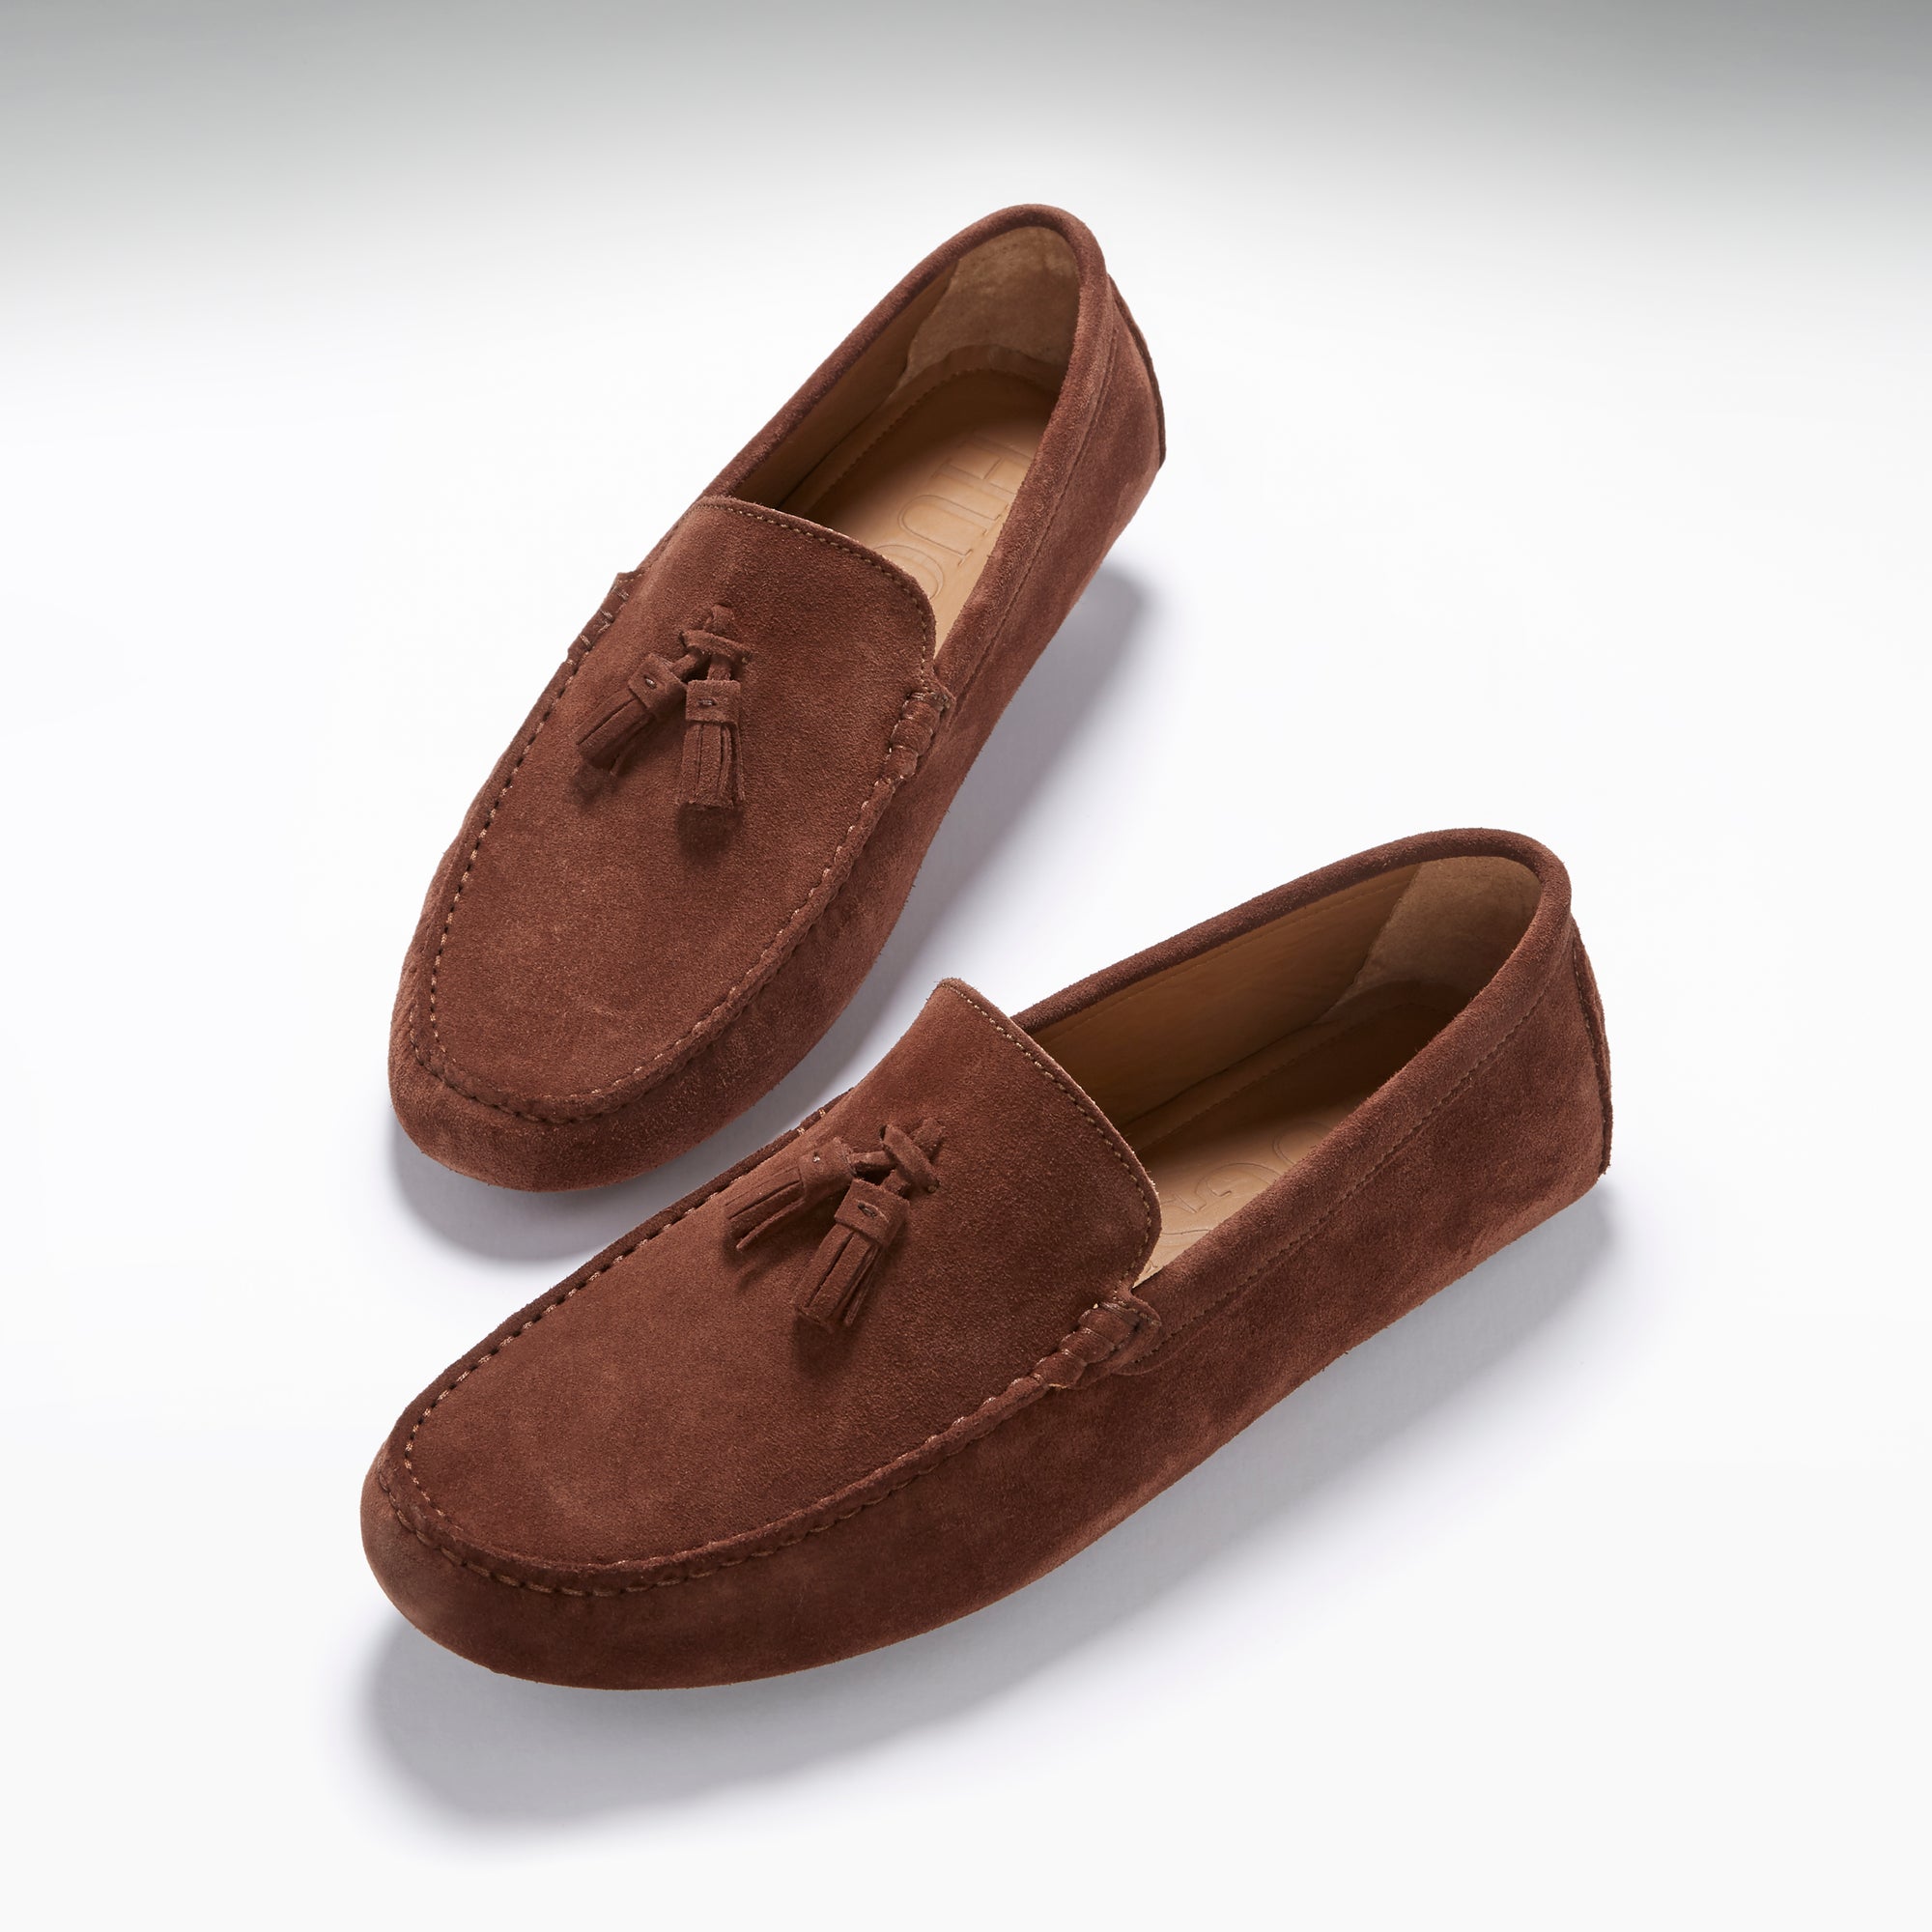 Tasselled Driving Loafers, mahogany brown suede